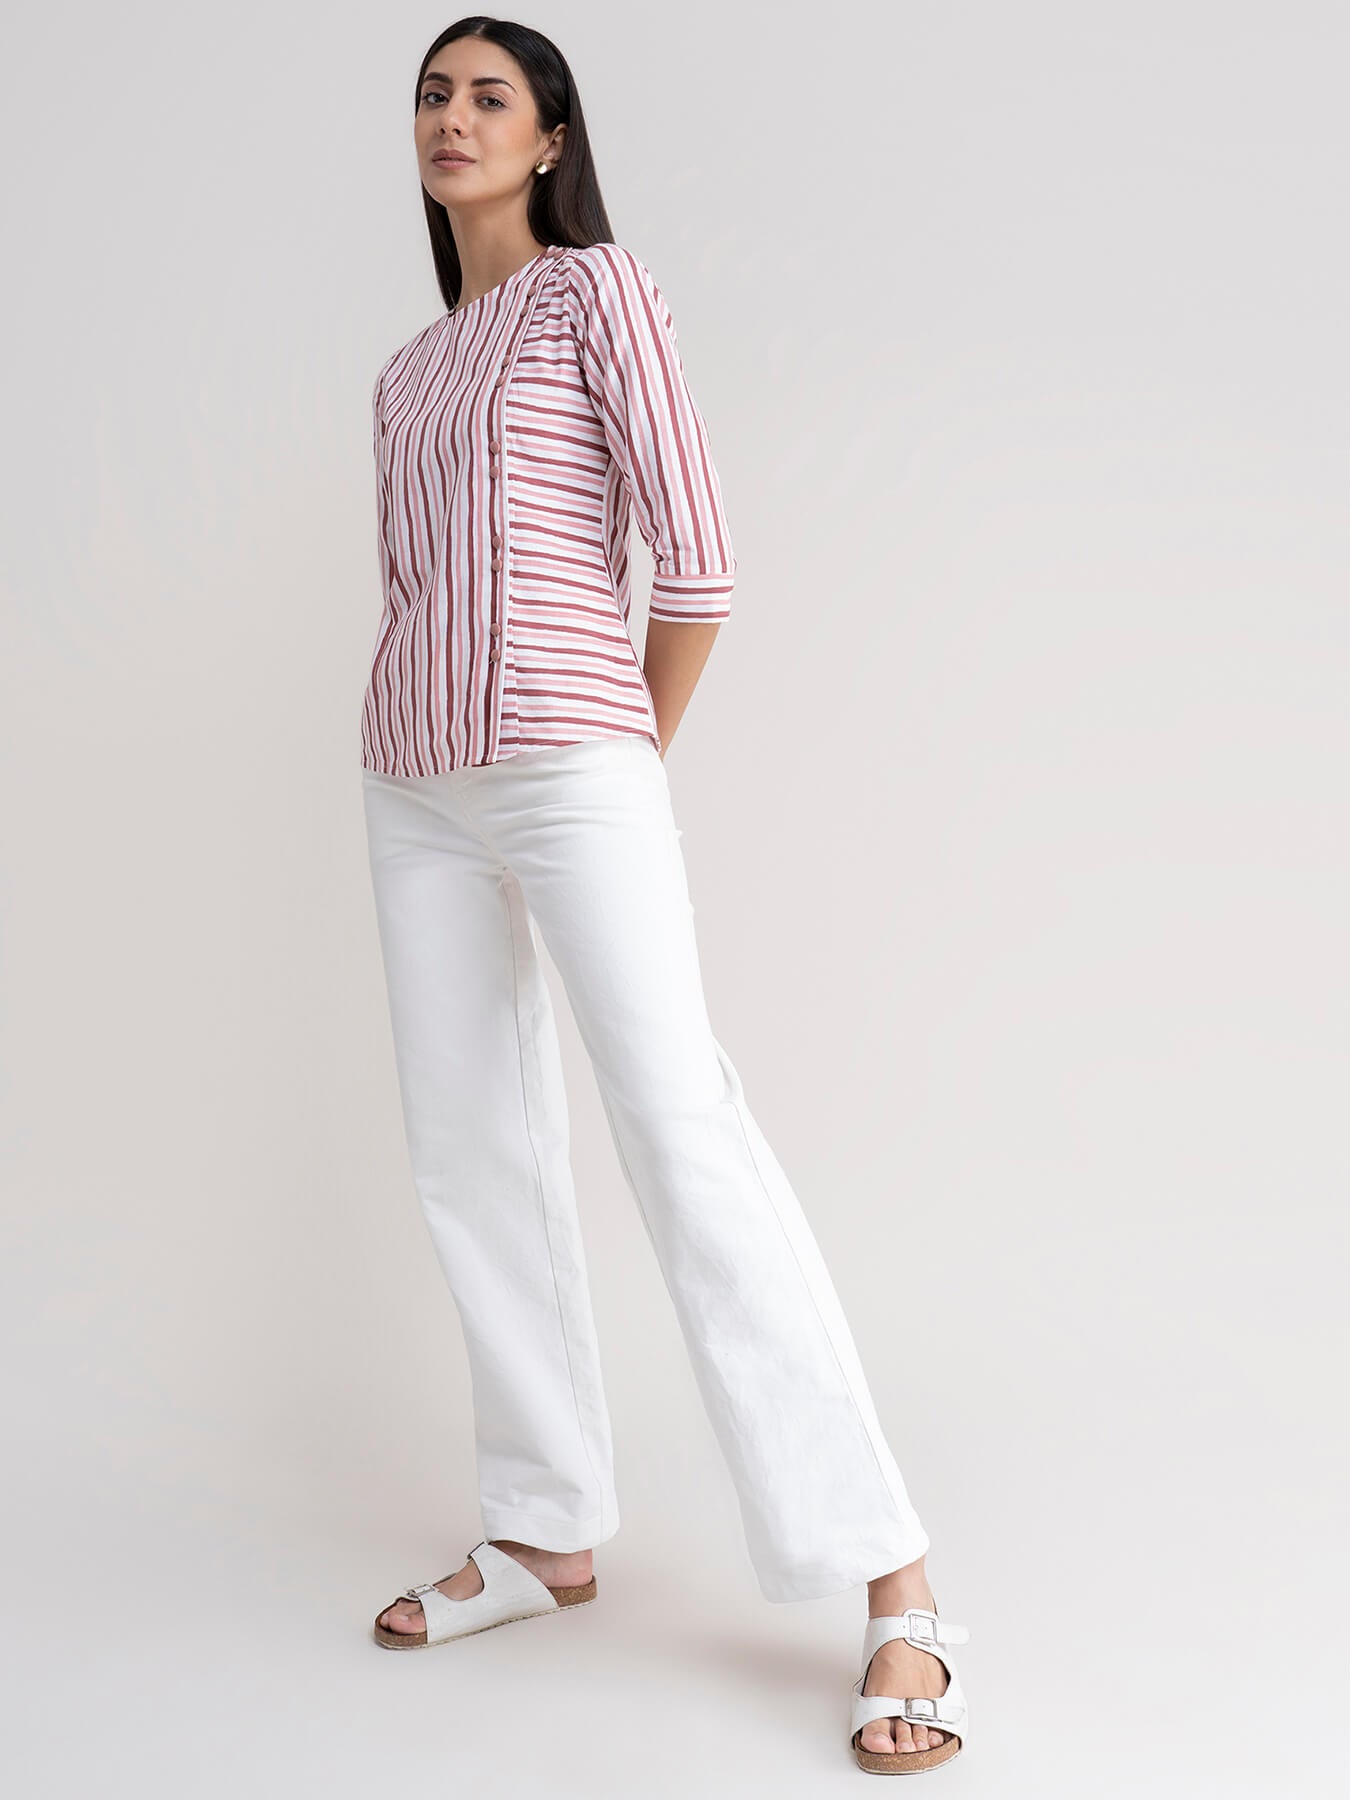 Linen Striped Top - Pink And White